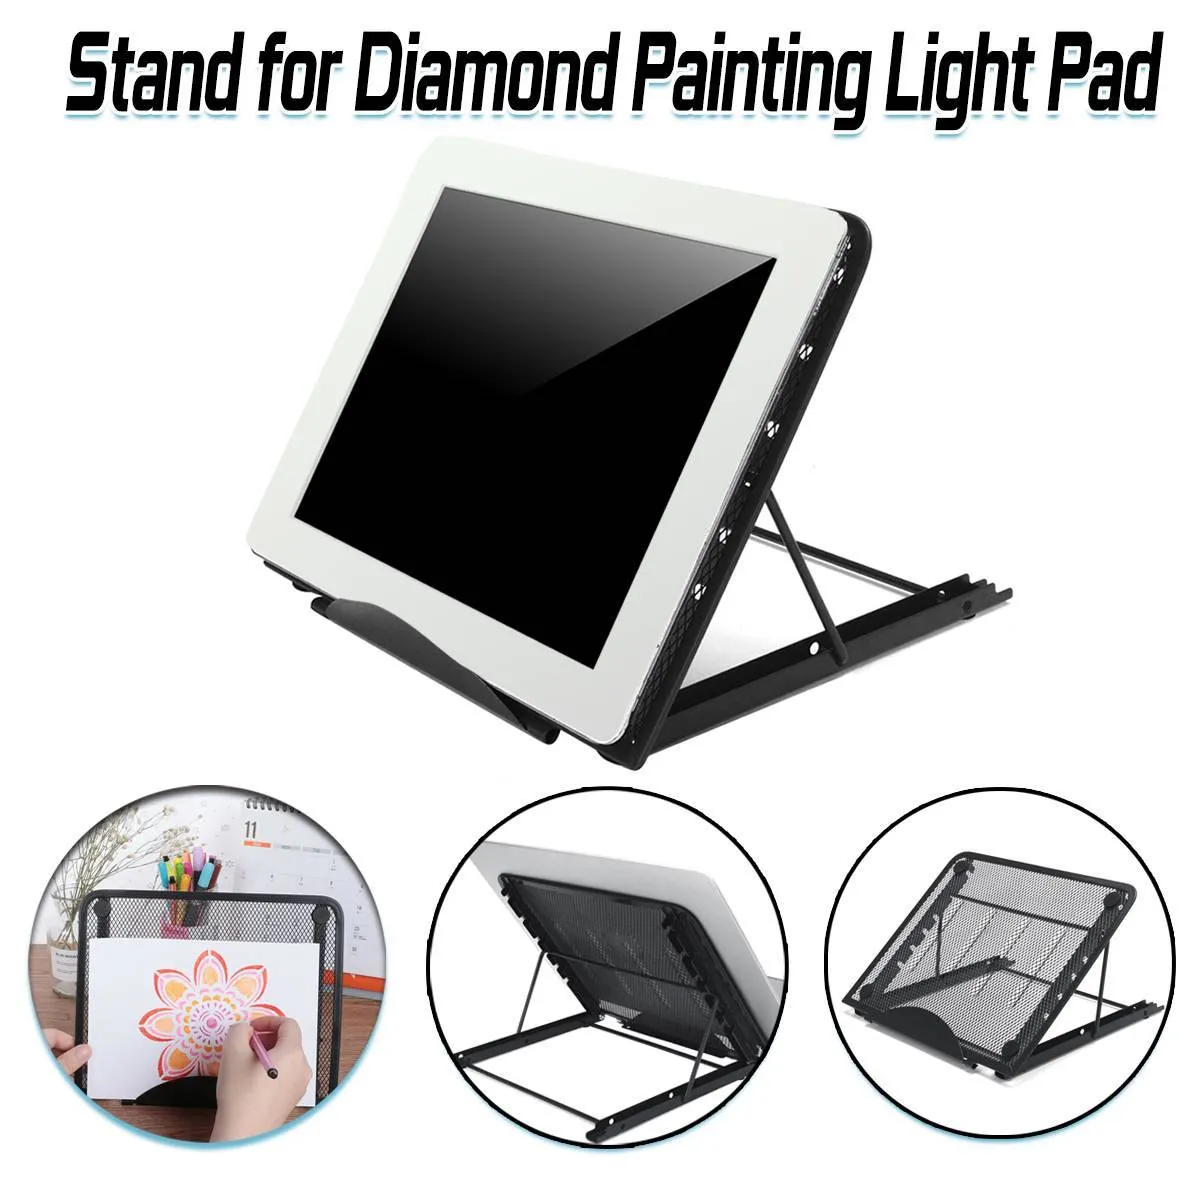 Foldable A4 LED Diamond Painting Light Pad Holder 5D DIY Diamond Embroidery Cross Stitch Accessories 6 Level Book Tablet Holder C16631977